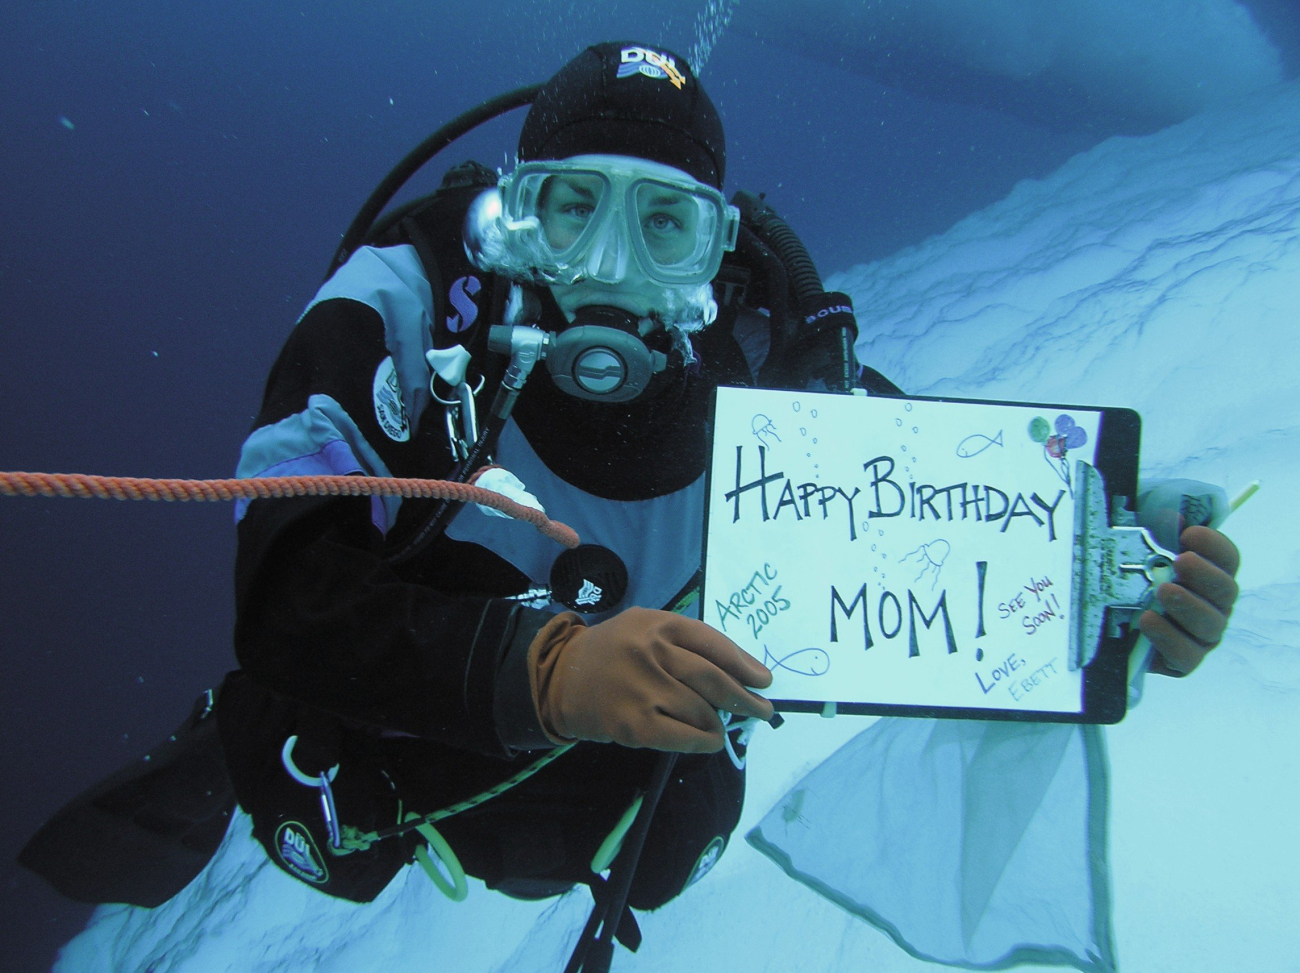 Out at sea on the USCGC Healy for a month, ice diver Elizabeth Calvertgets creative making a birthday card she can digitally send to her mother